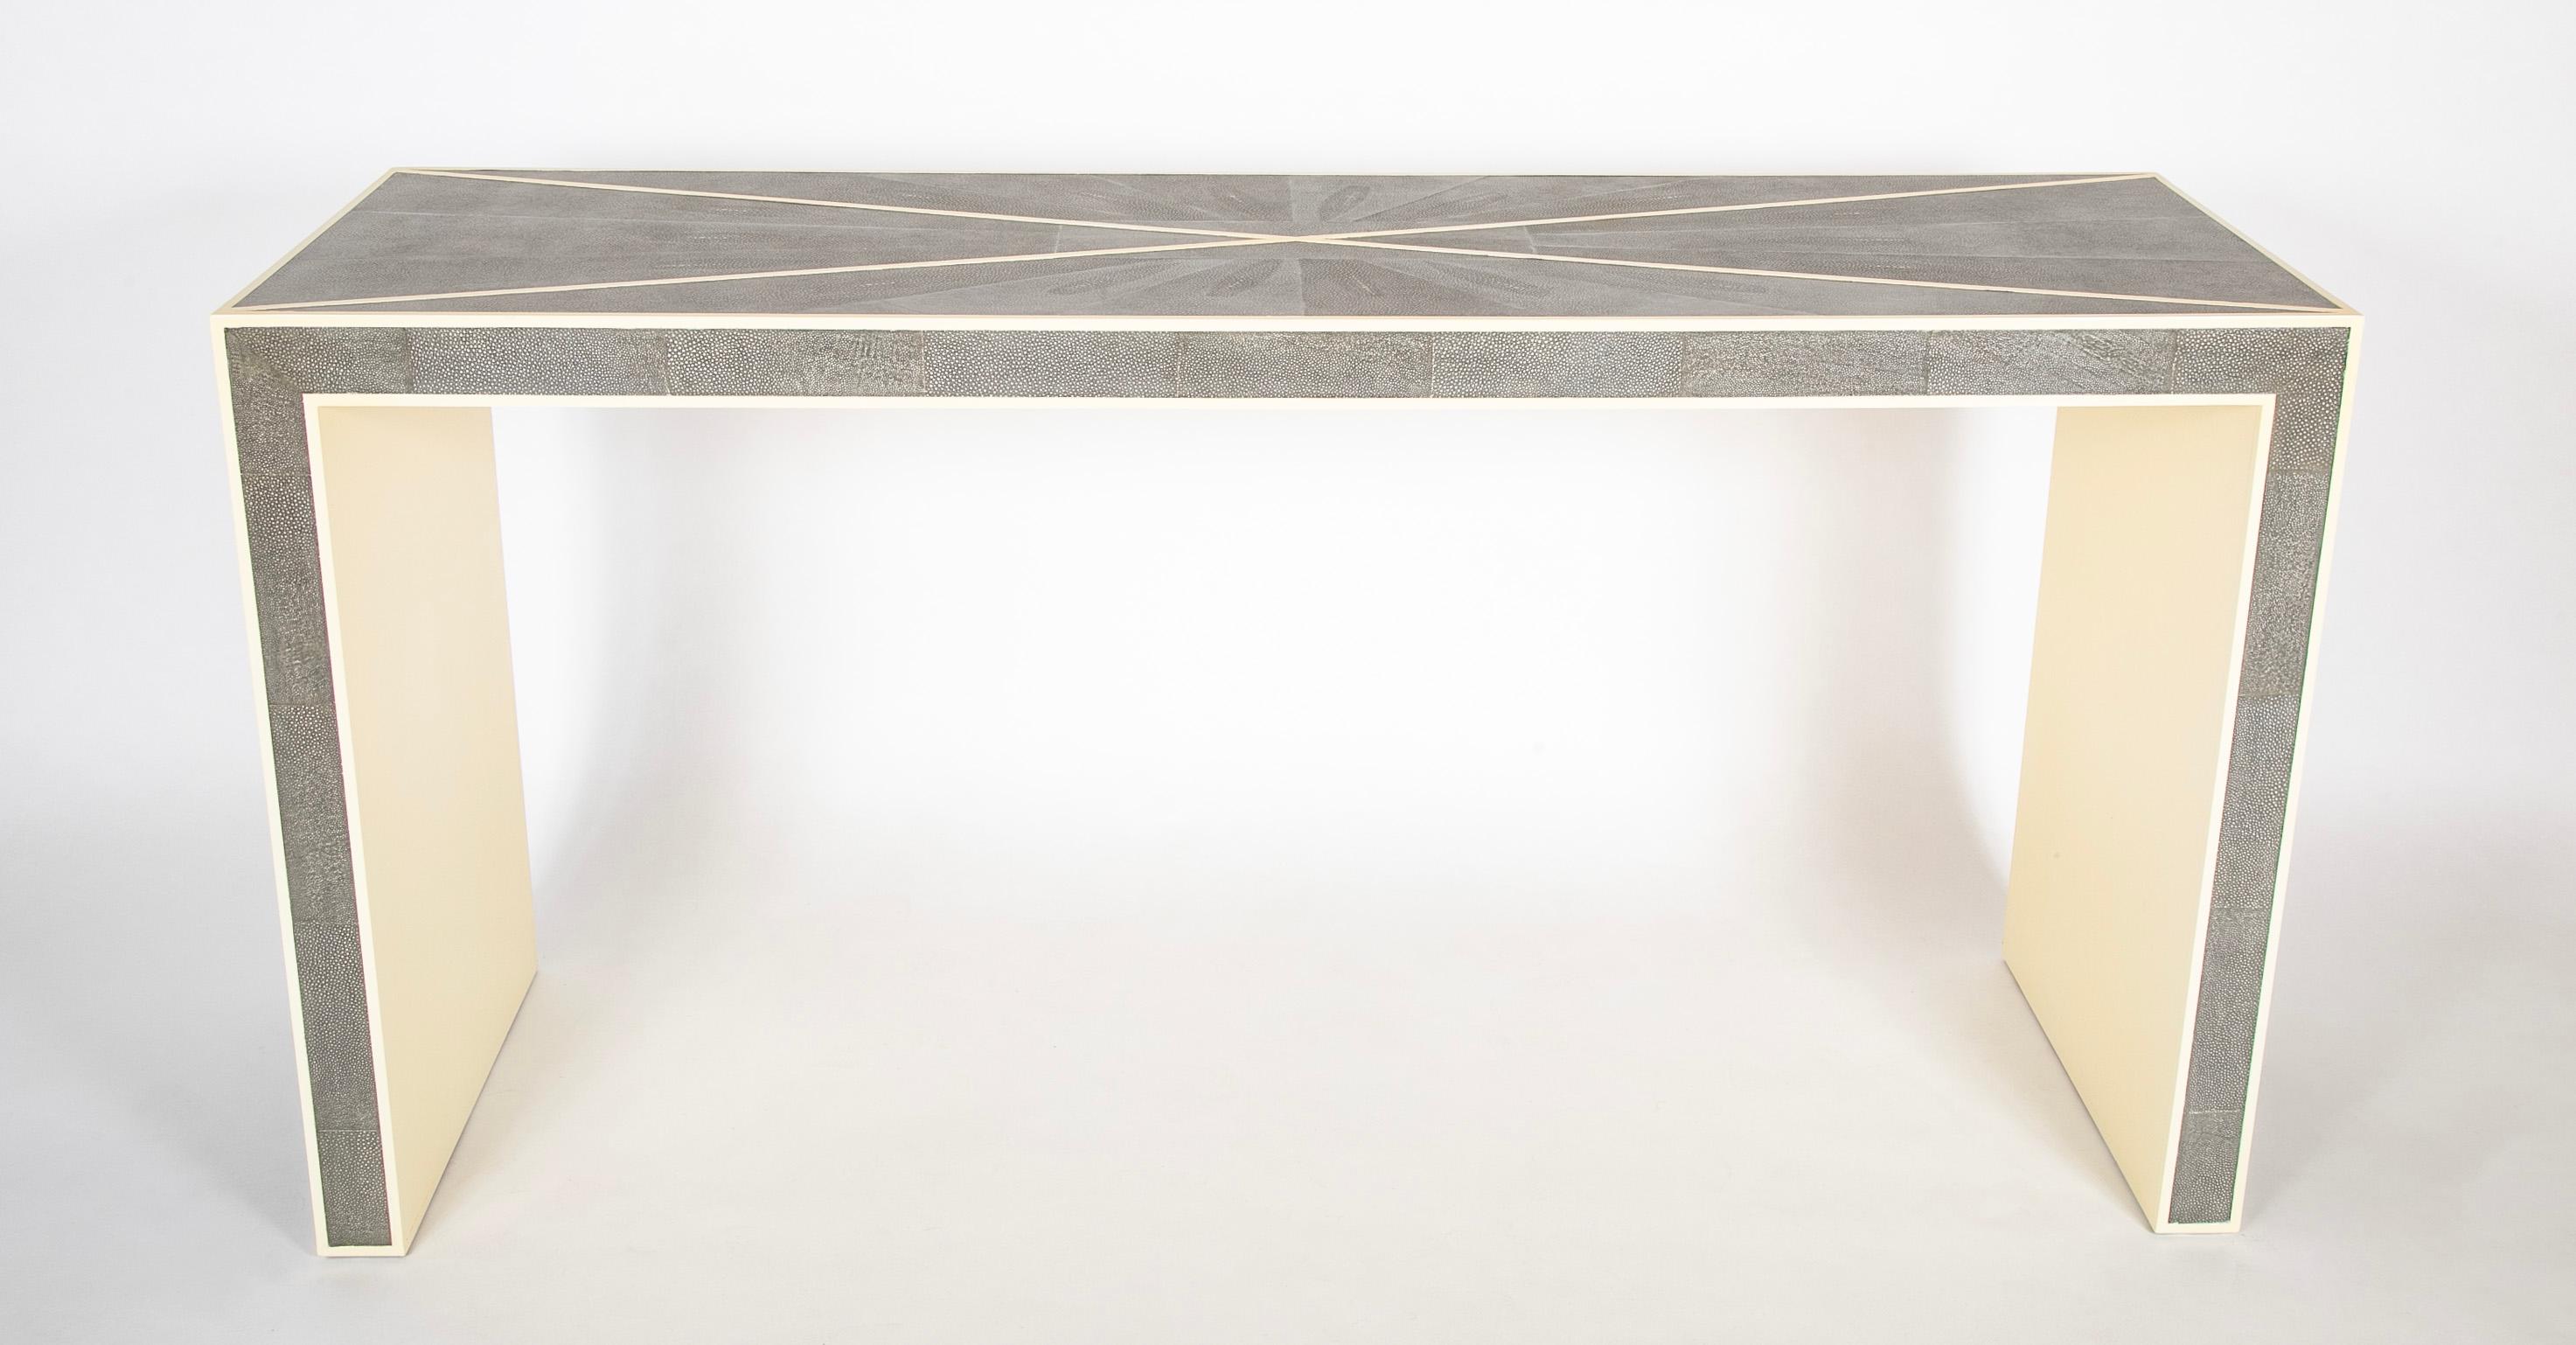 A stunning rectangular console table with triangles panels of shagreen veneer delineated by raised cream colored lacquer borders. This beautiful Karl Springer style console with make and entryway or foyer, or any other room it is placed in. Expertly